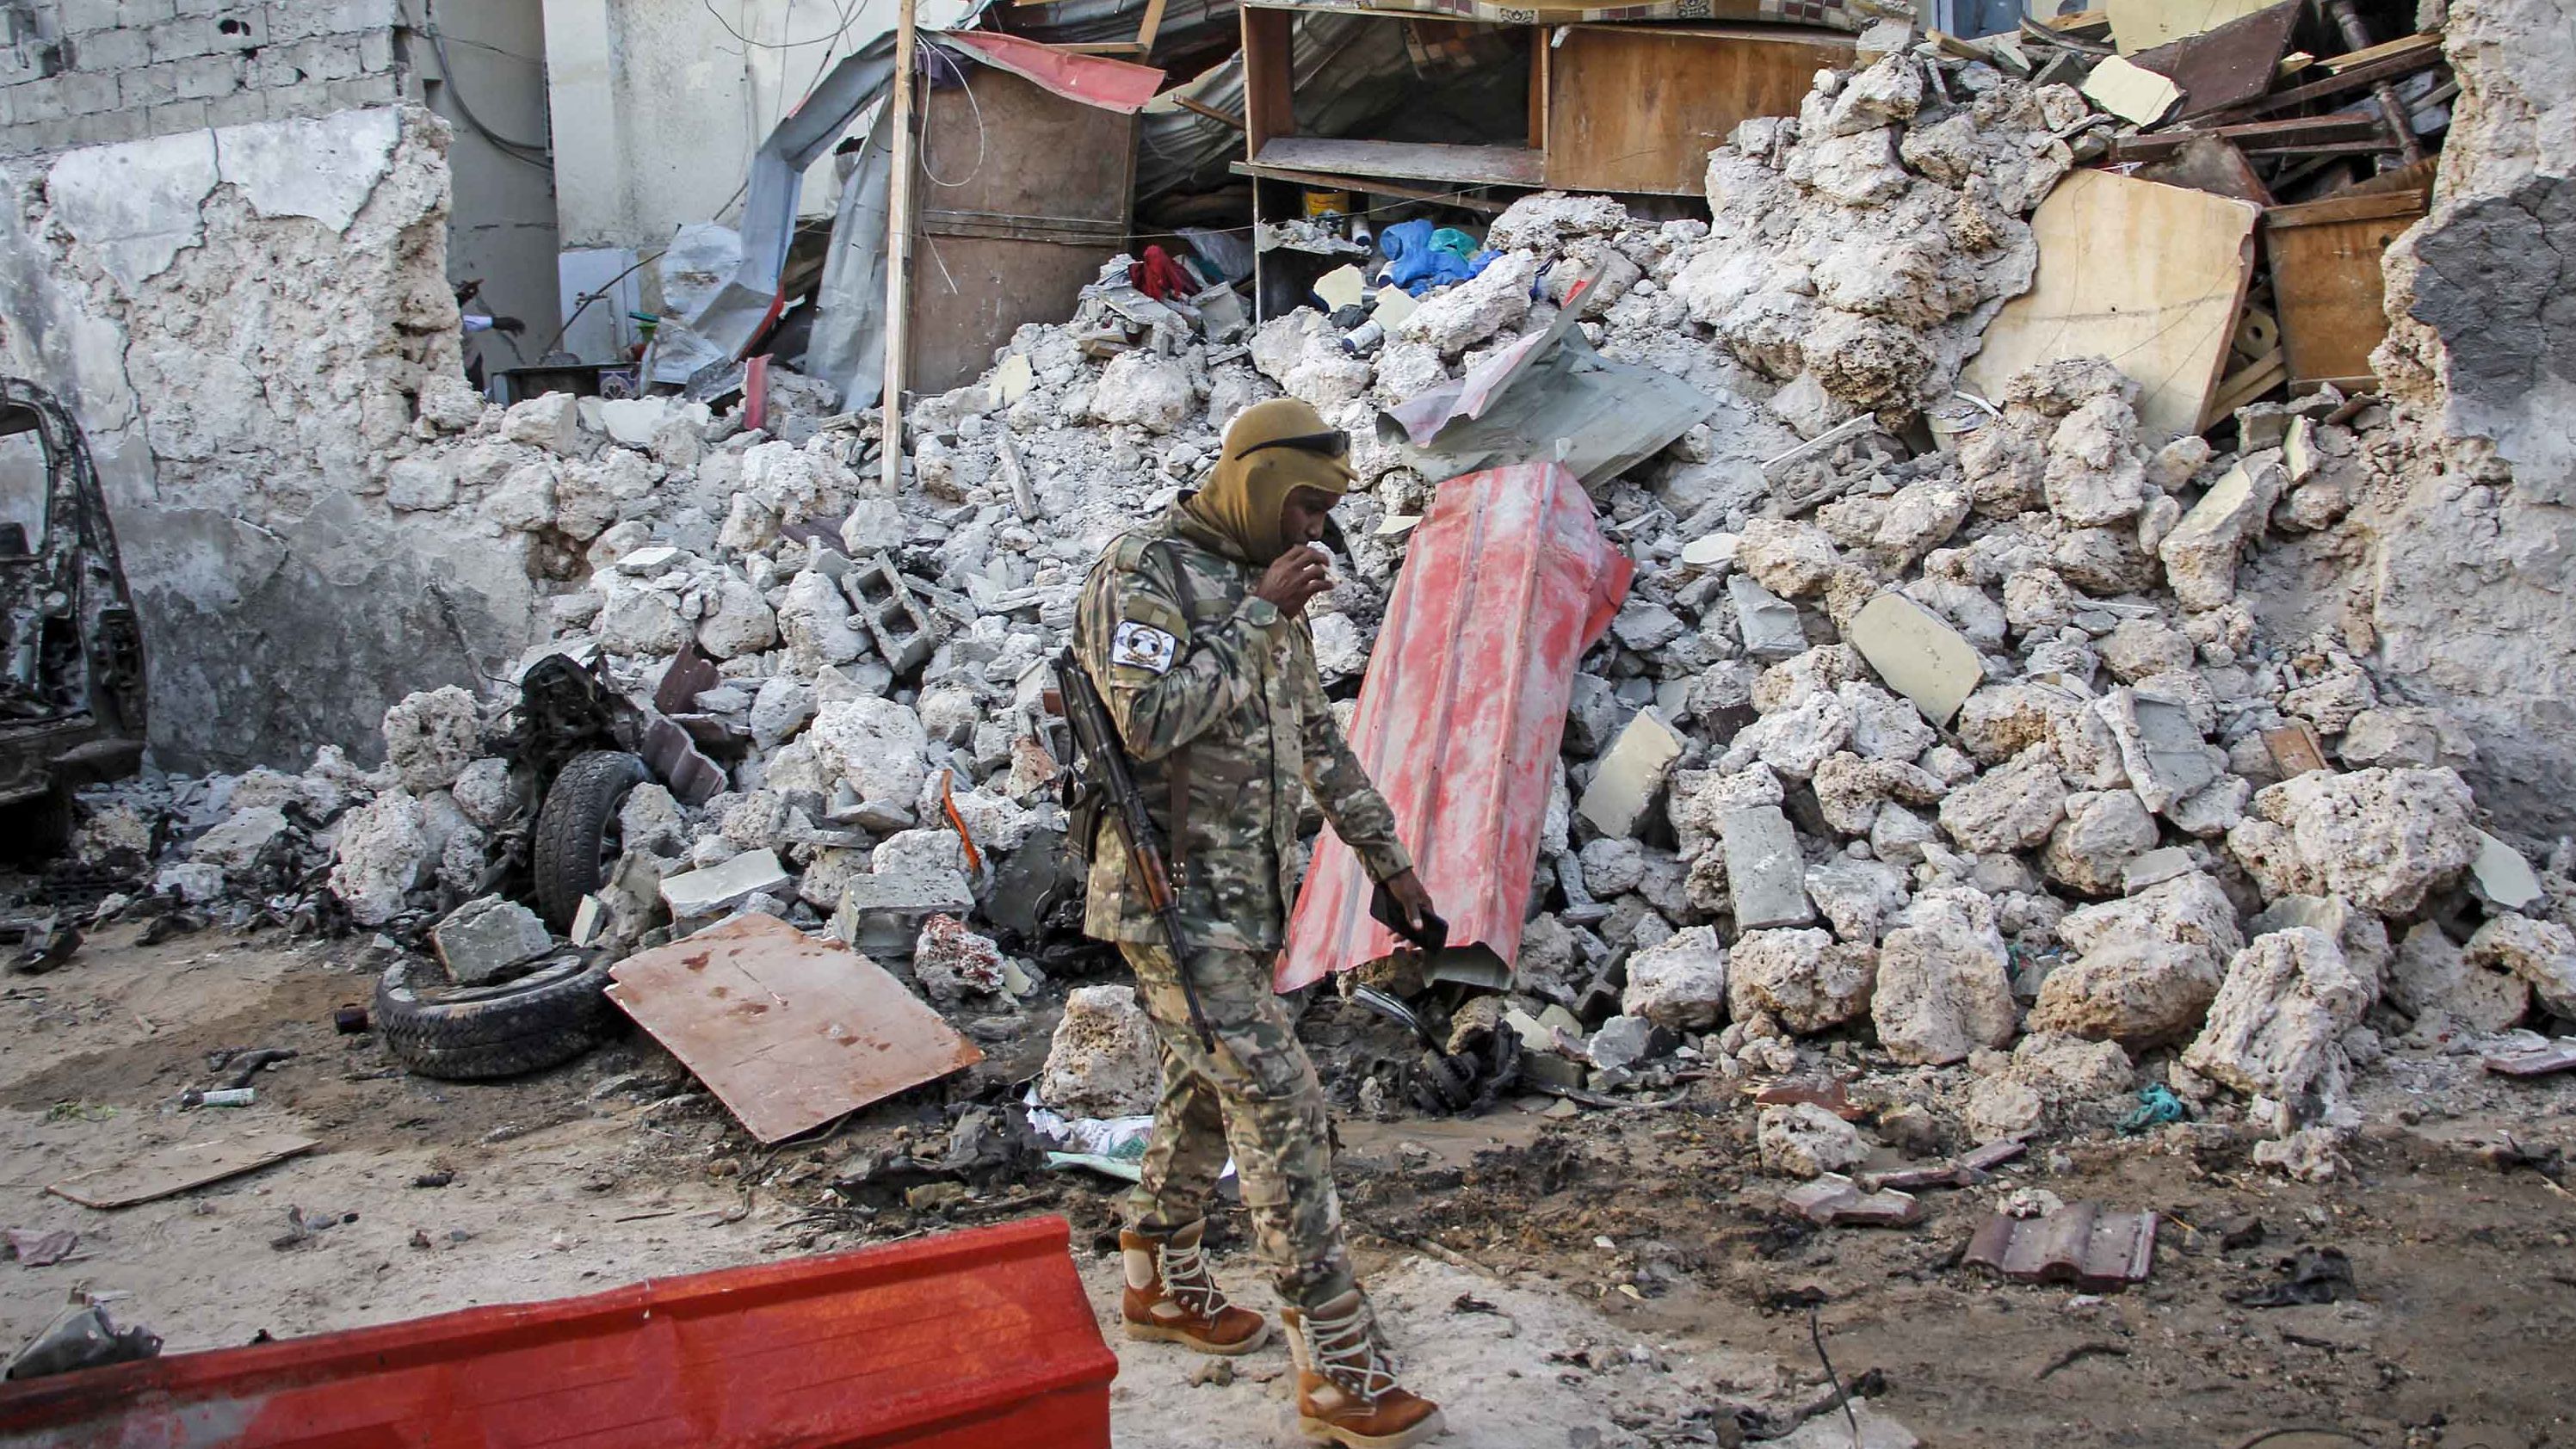 A soldier walks past wreckage in the aftermath of an attack on the Afrik hotel in Mogadishu